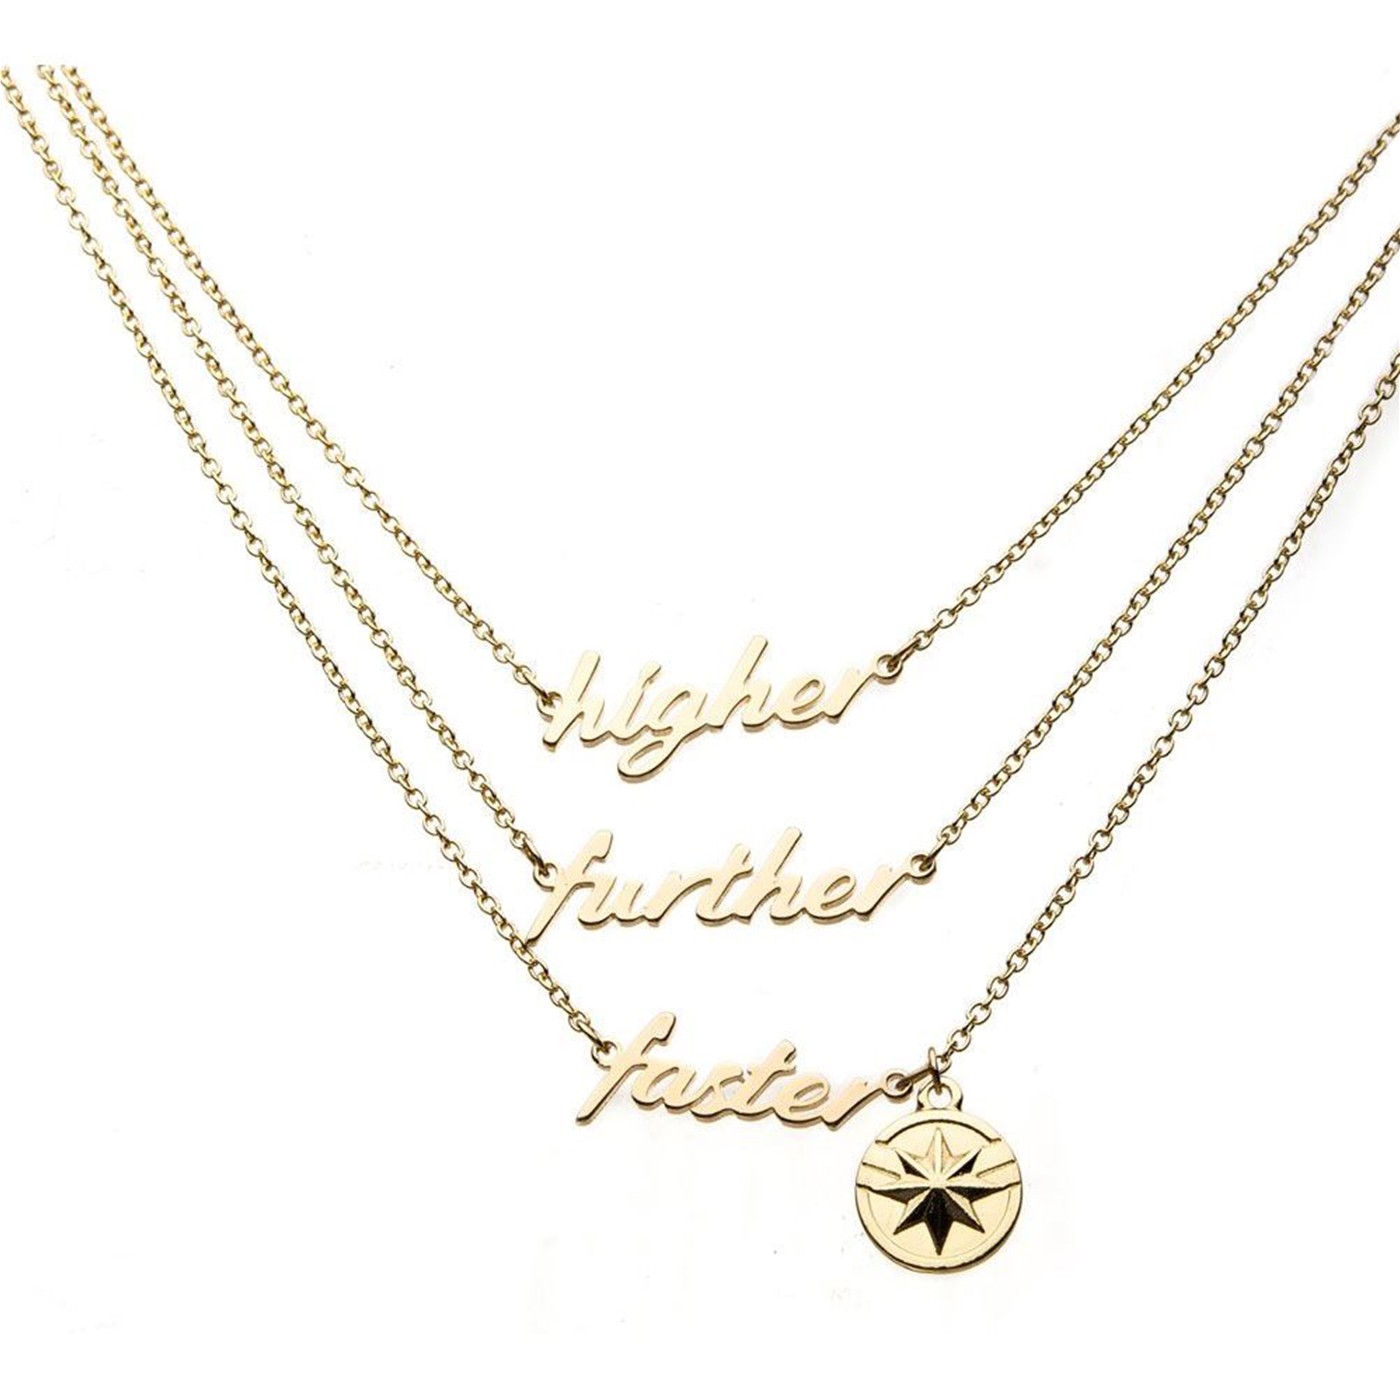 Captain Marvel Movie Higher Further Faster Necklace